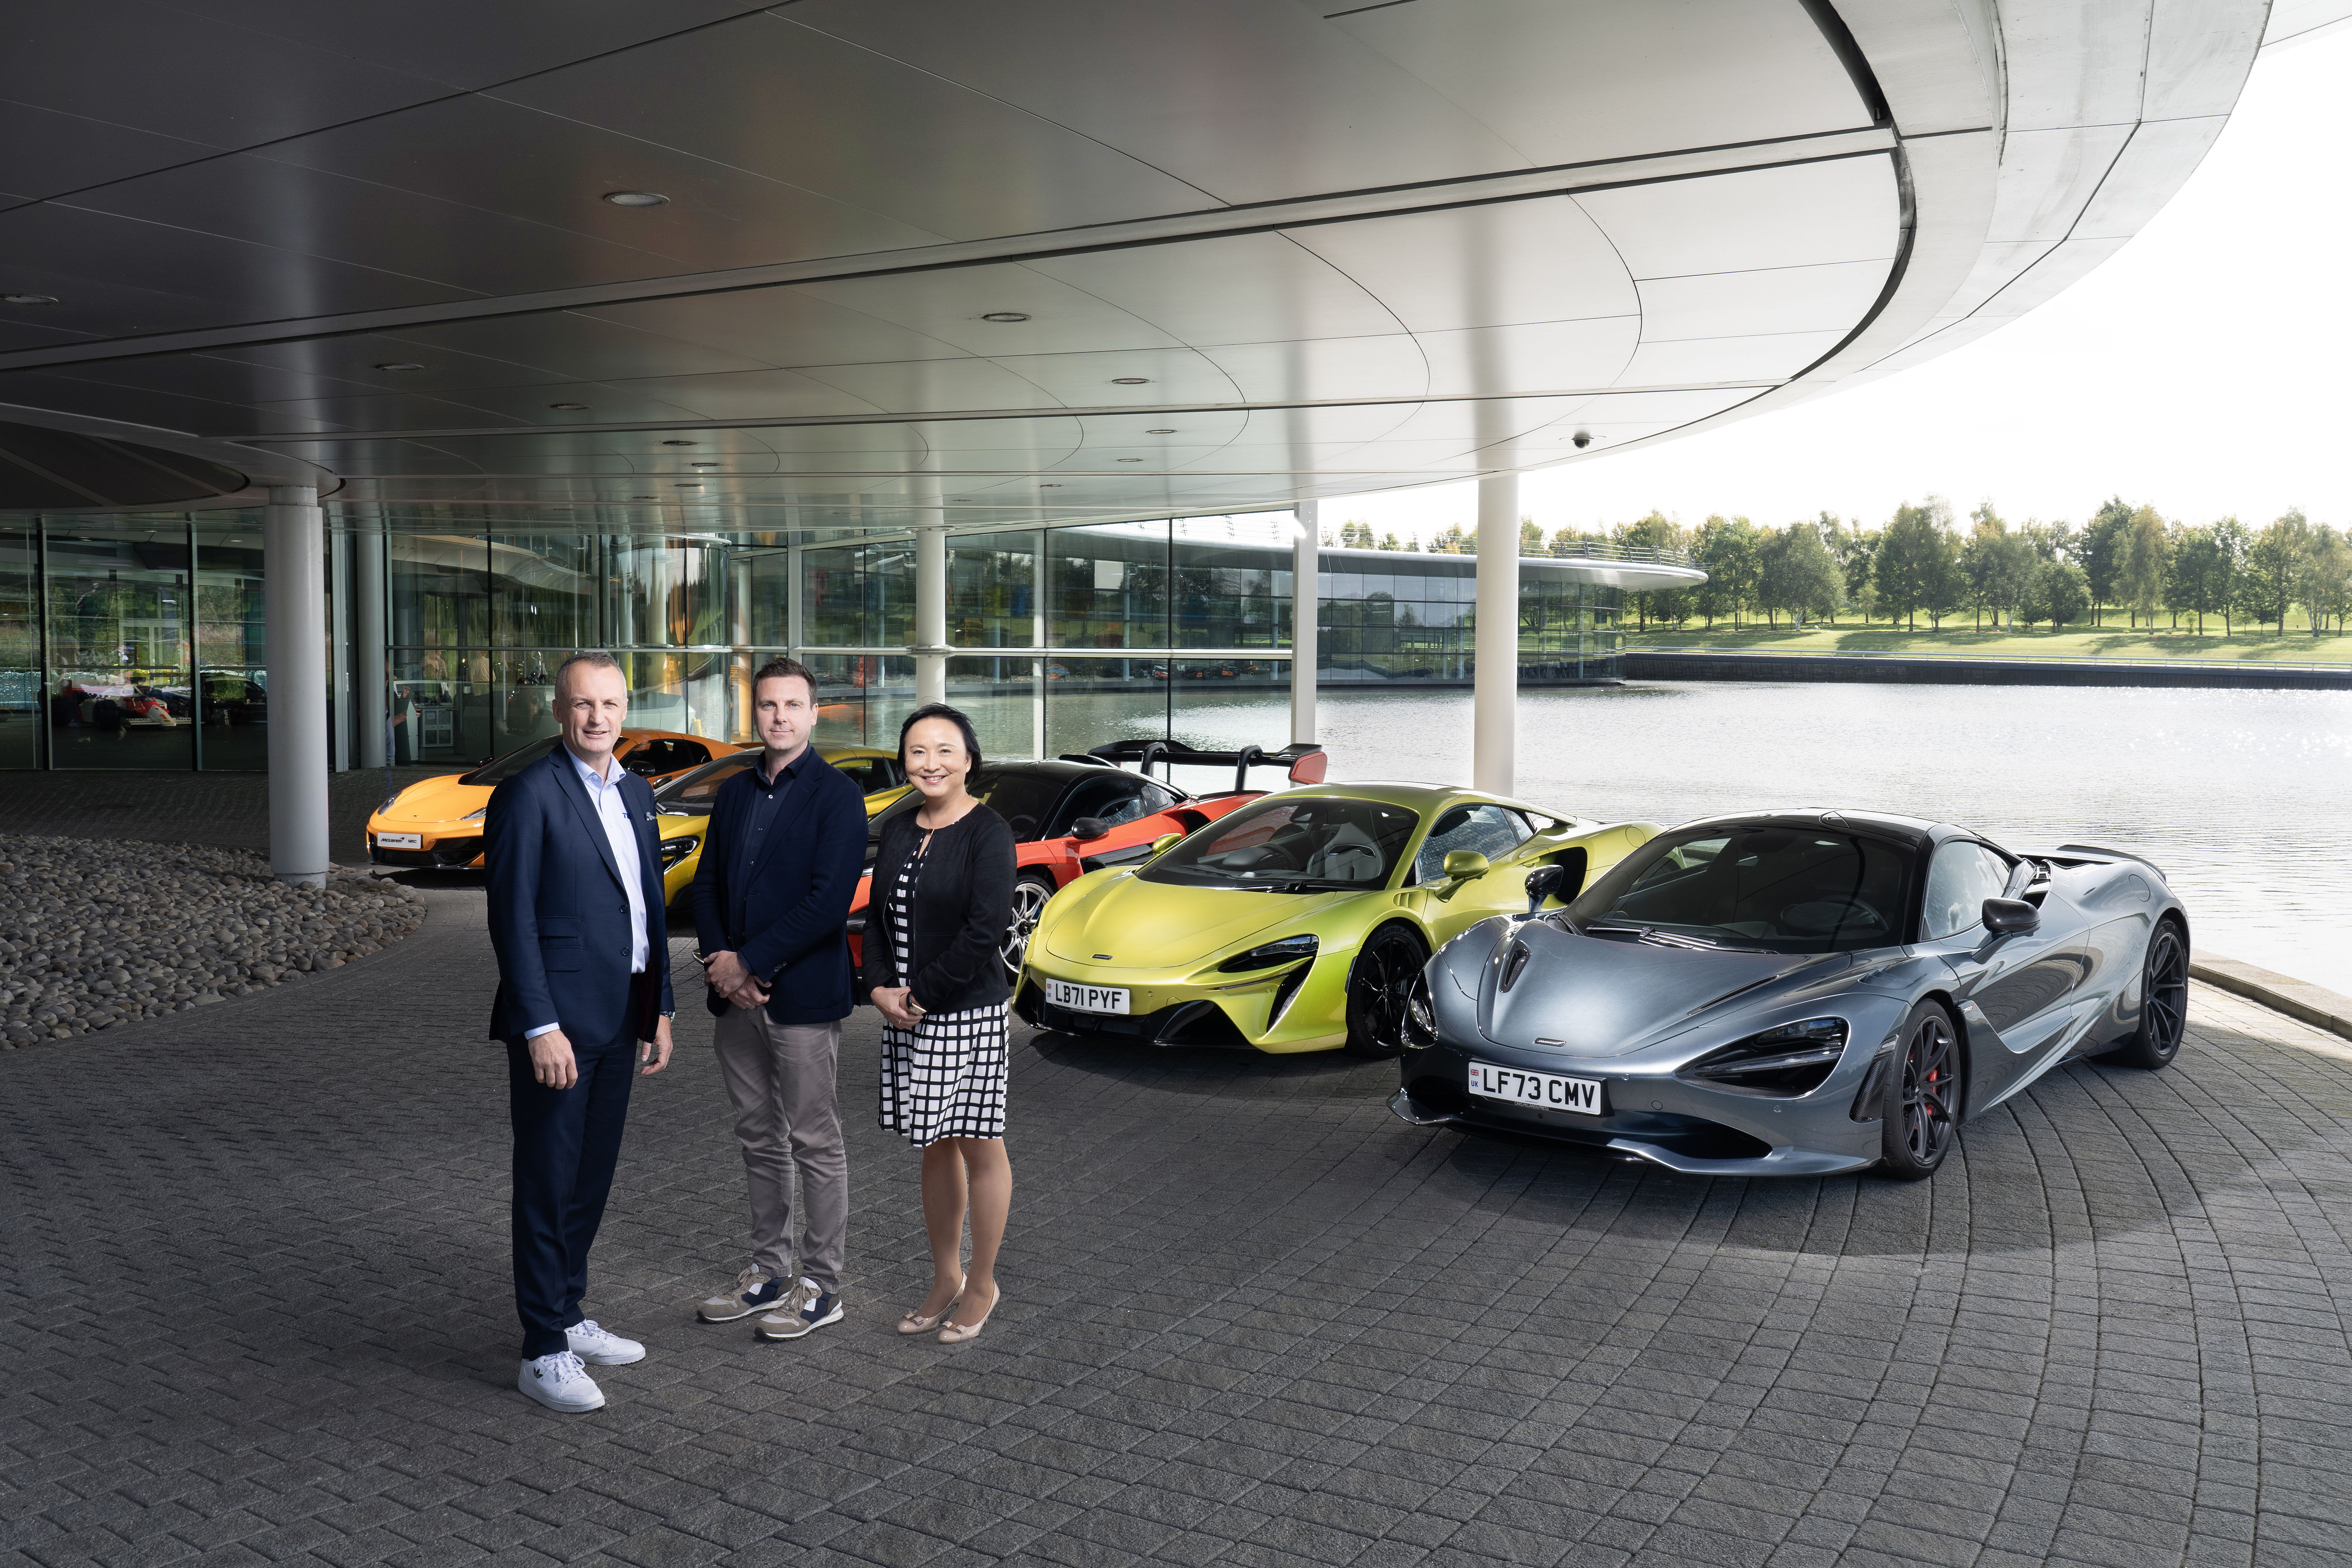 Matthias Mialhe, Vicepresident and General Manger EMEA Monroe and Fei Fei Metzler Vicepresident Product Management Monroe, joined Charles Sanderson, Chief Technical Officer McLaren, in this very special occasion to celebrate the partnership.